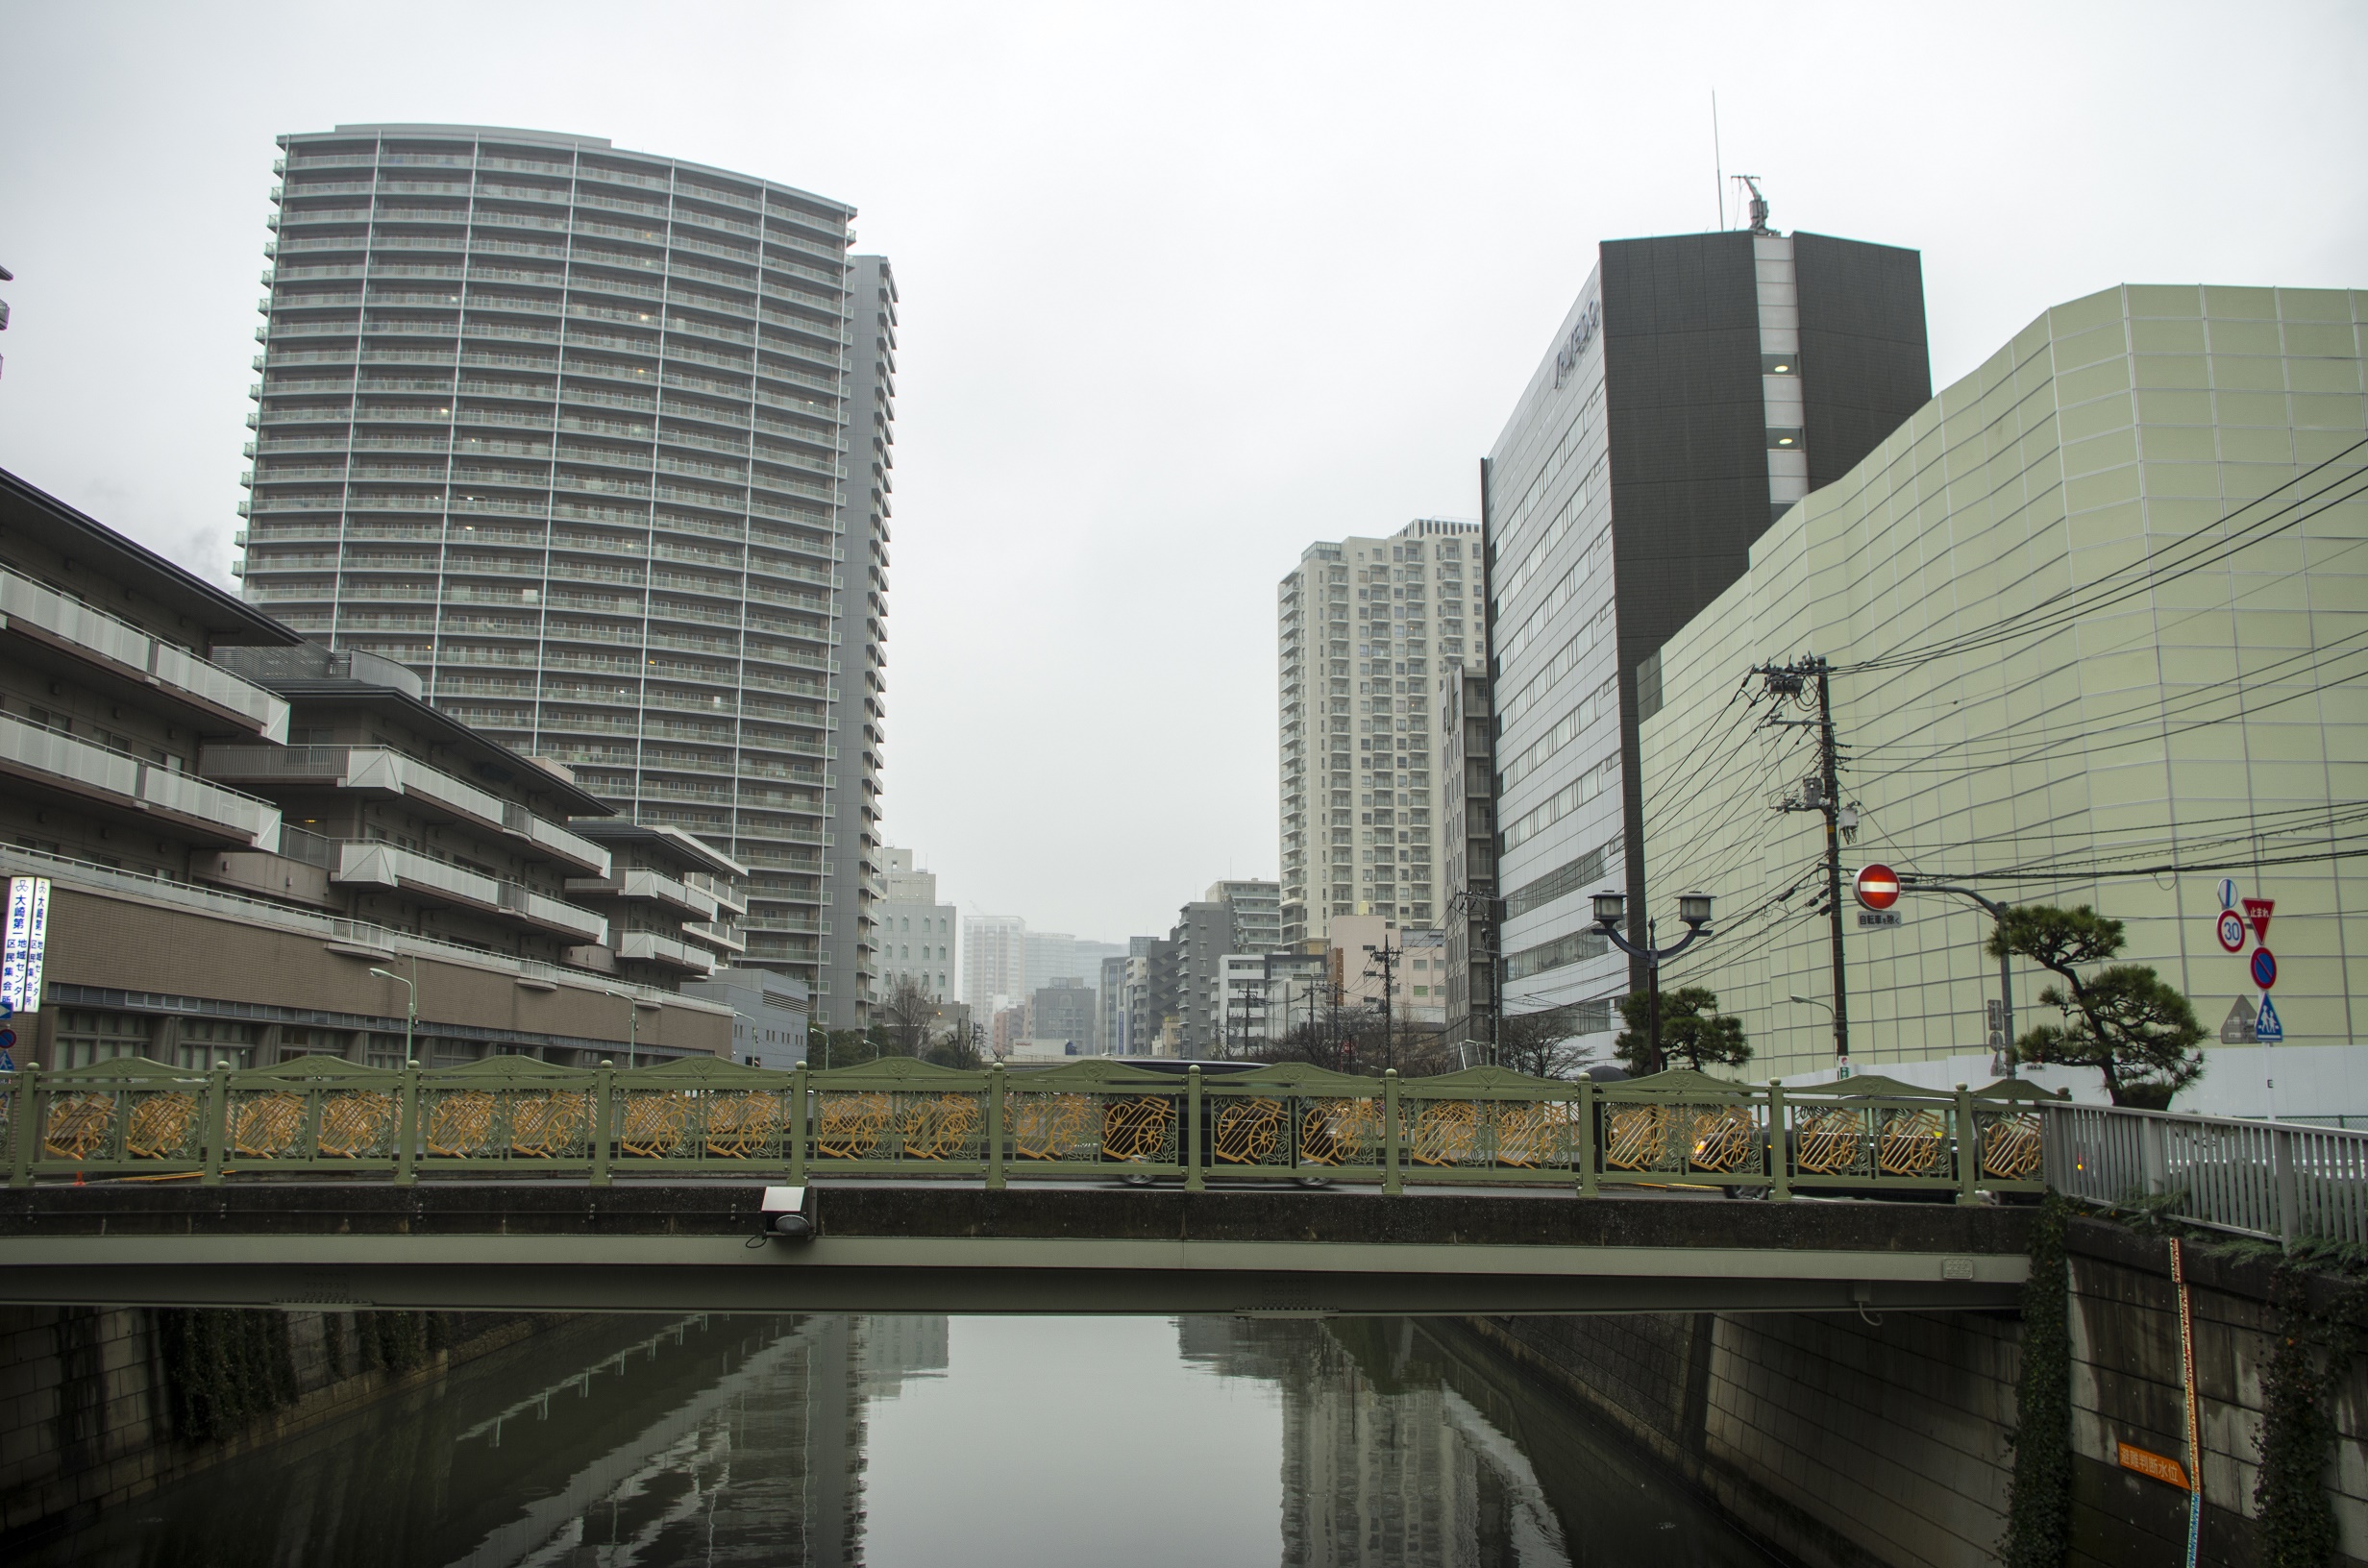 Meguro river with the view of Meguro itself. This is a well-known hanami spot during the season